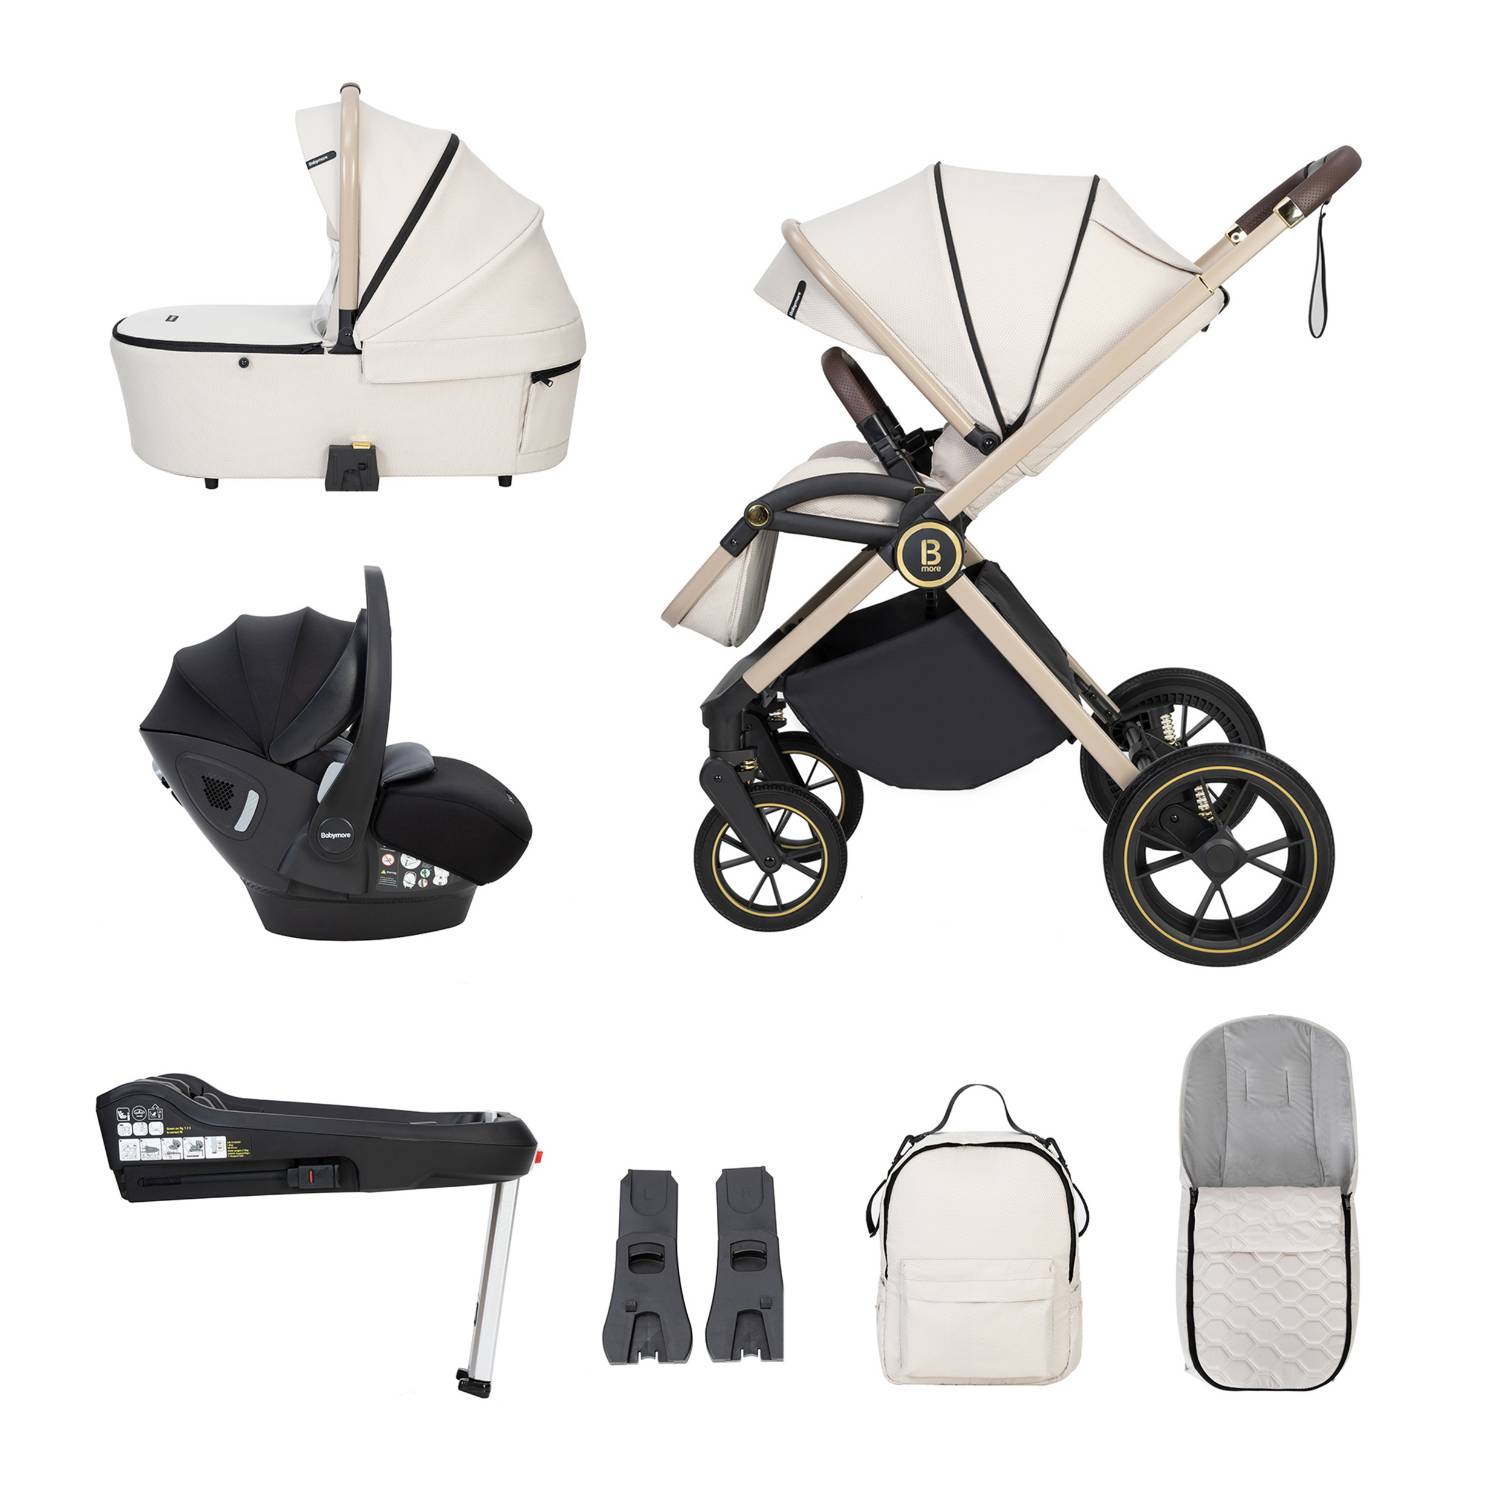 Accessories and other inclusions in the Babymore Kai 3-in-1 Travel System bundle